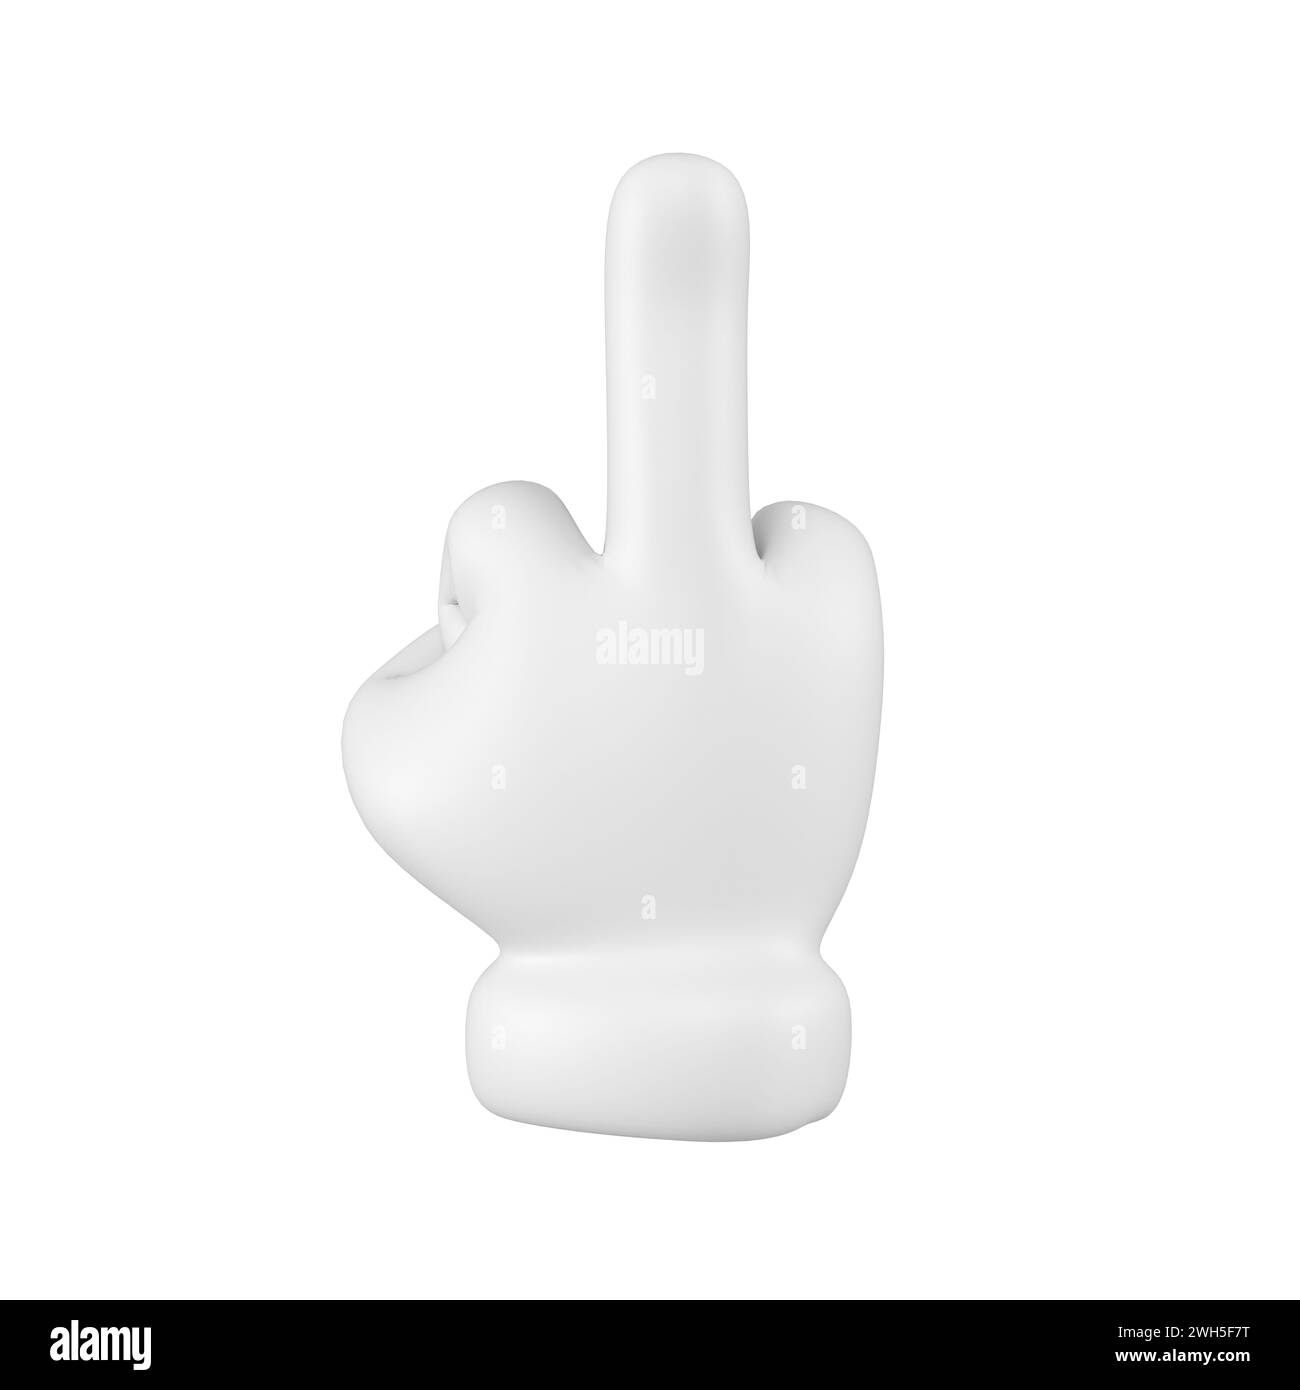 White emoji hand with middle finger gesture isolated. Showing protest symbol or sign concept. 3d rendering. Stock Photo